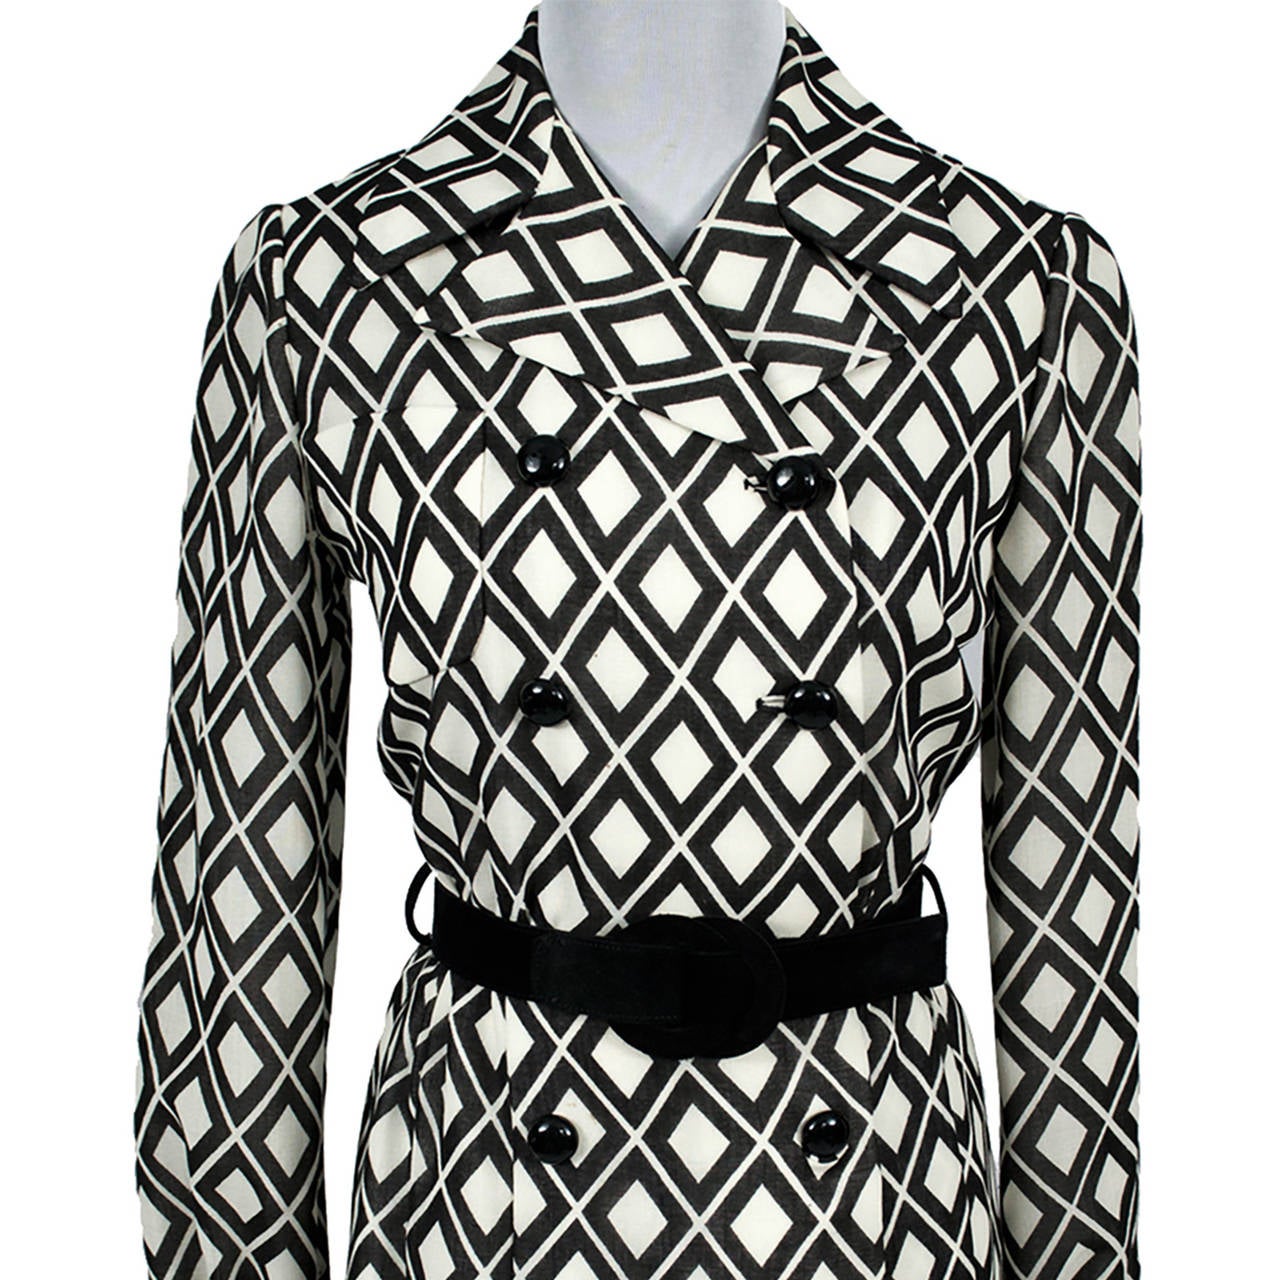 This is a really wonderful late 1960's or early 1970's rare Valentino dress and it's one of my favorites! Fabulous Boutique Valentino vintage dress with diamonds that resemble the V logo on the Valentino label. Dark brown and ivory with matching